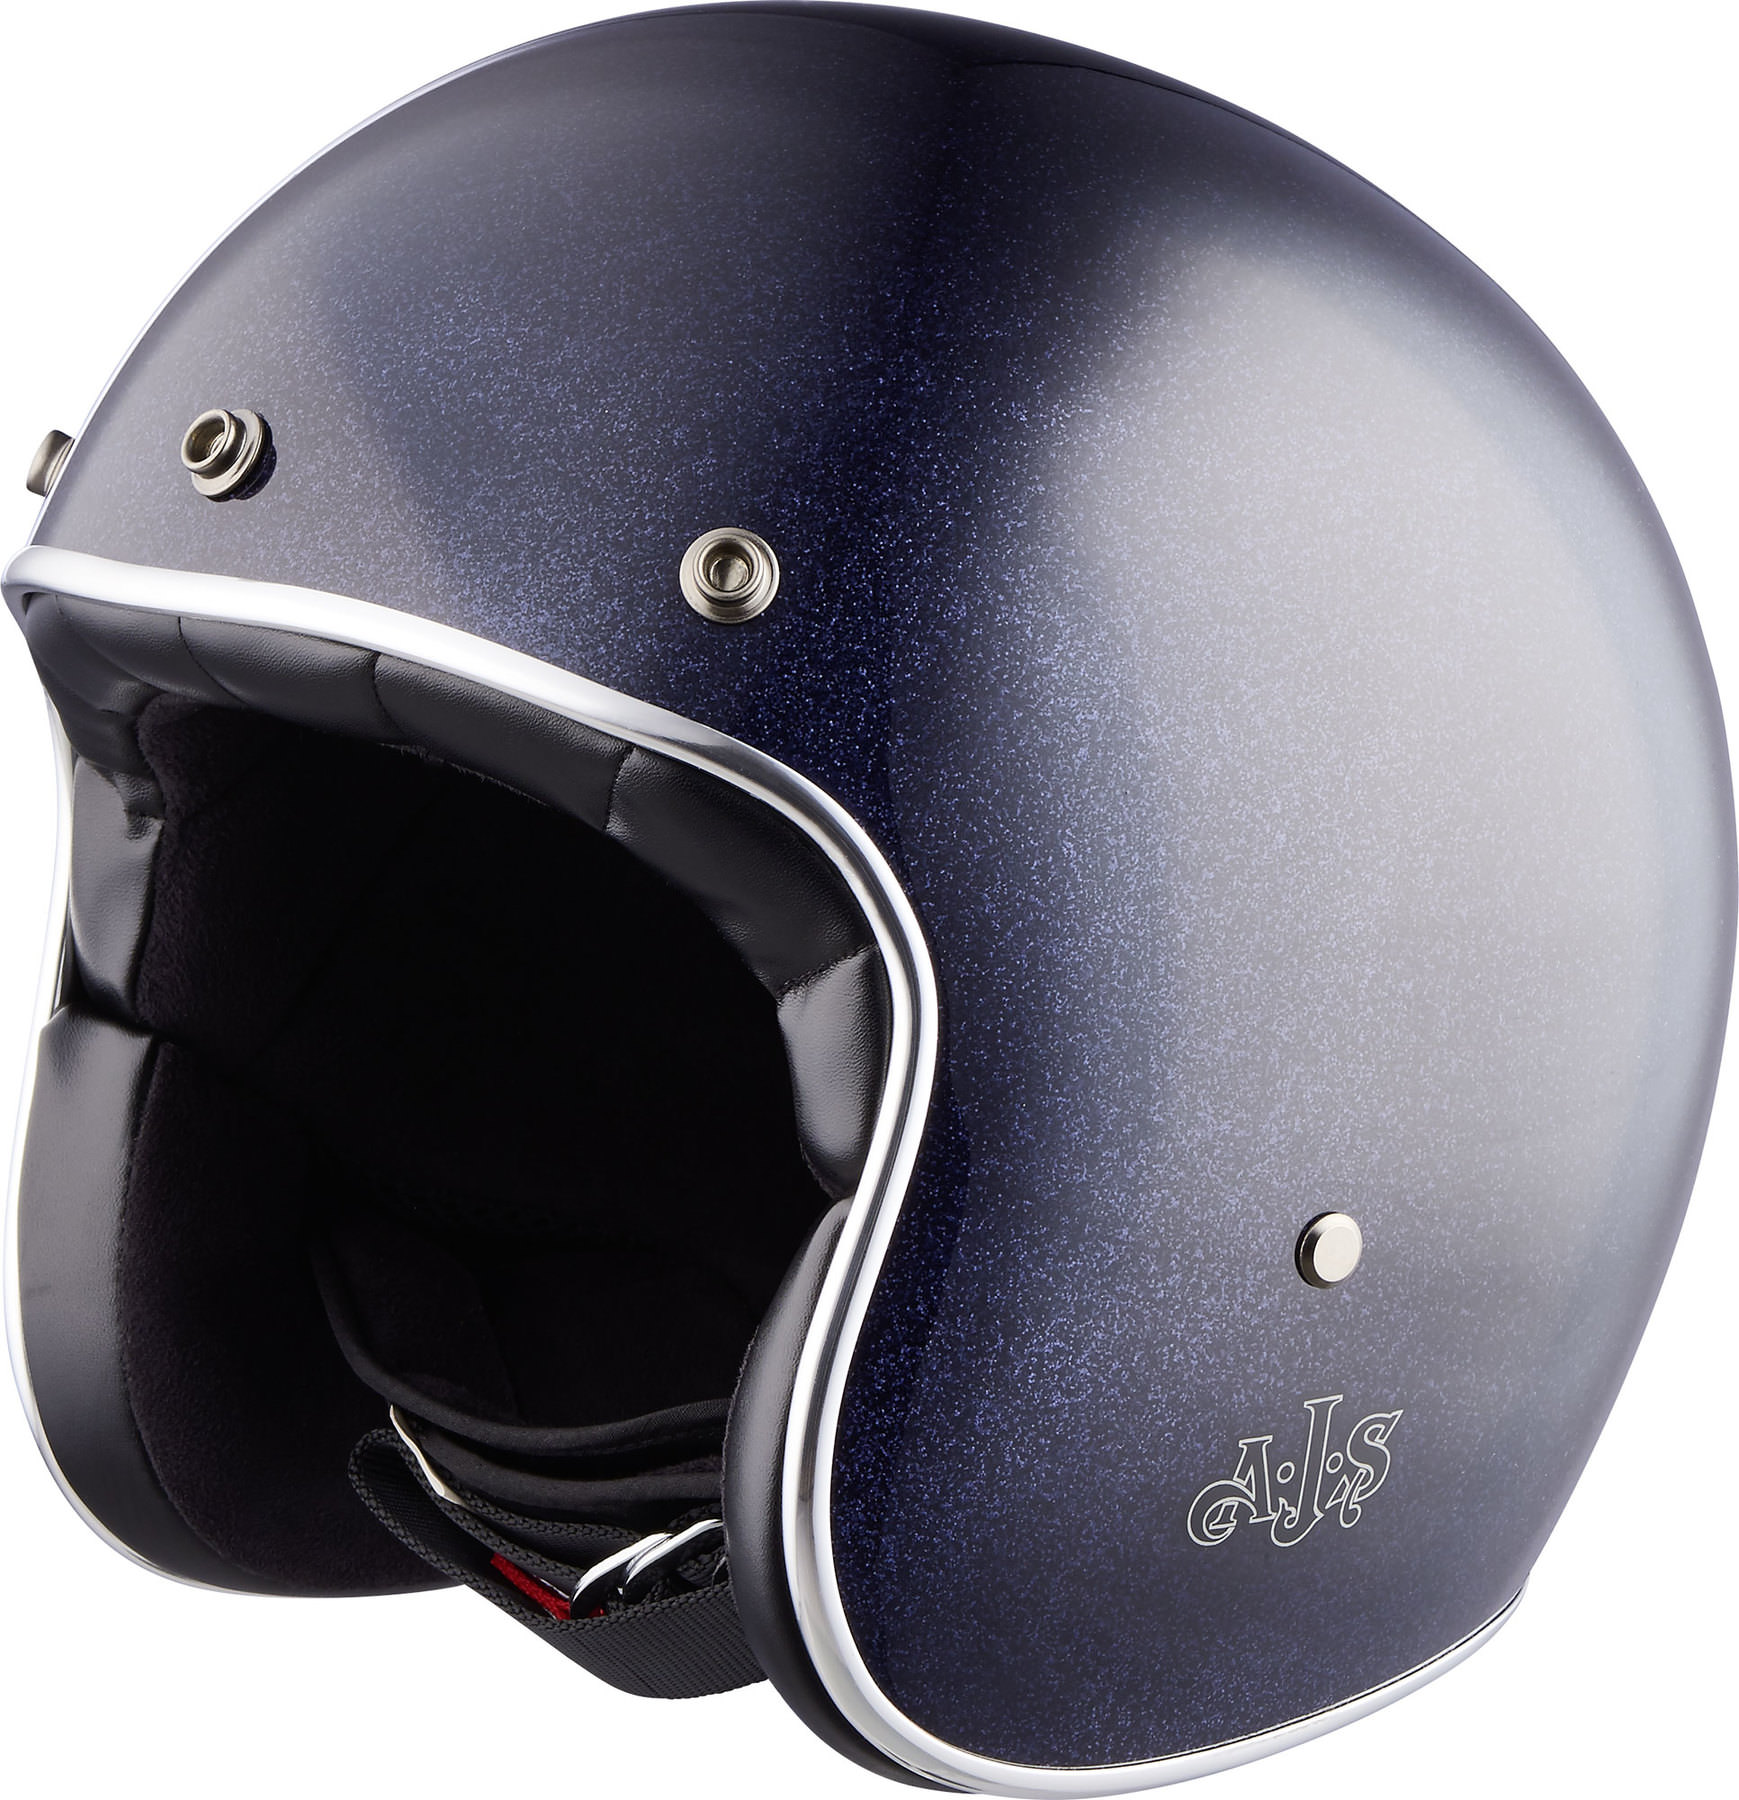 Buy AJS Vintage Jet Jet Helmet | Louis motorcycle clothing and technology